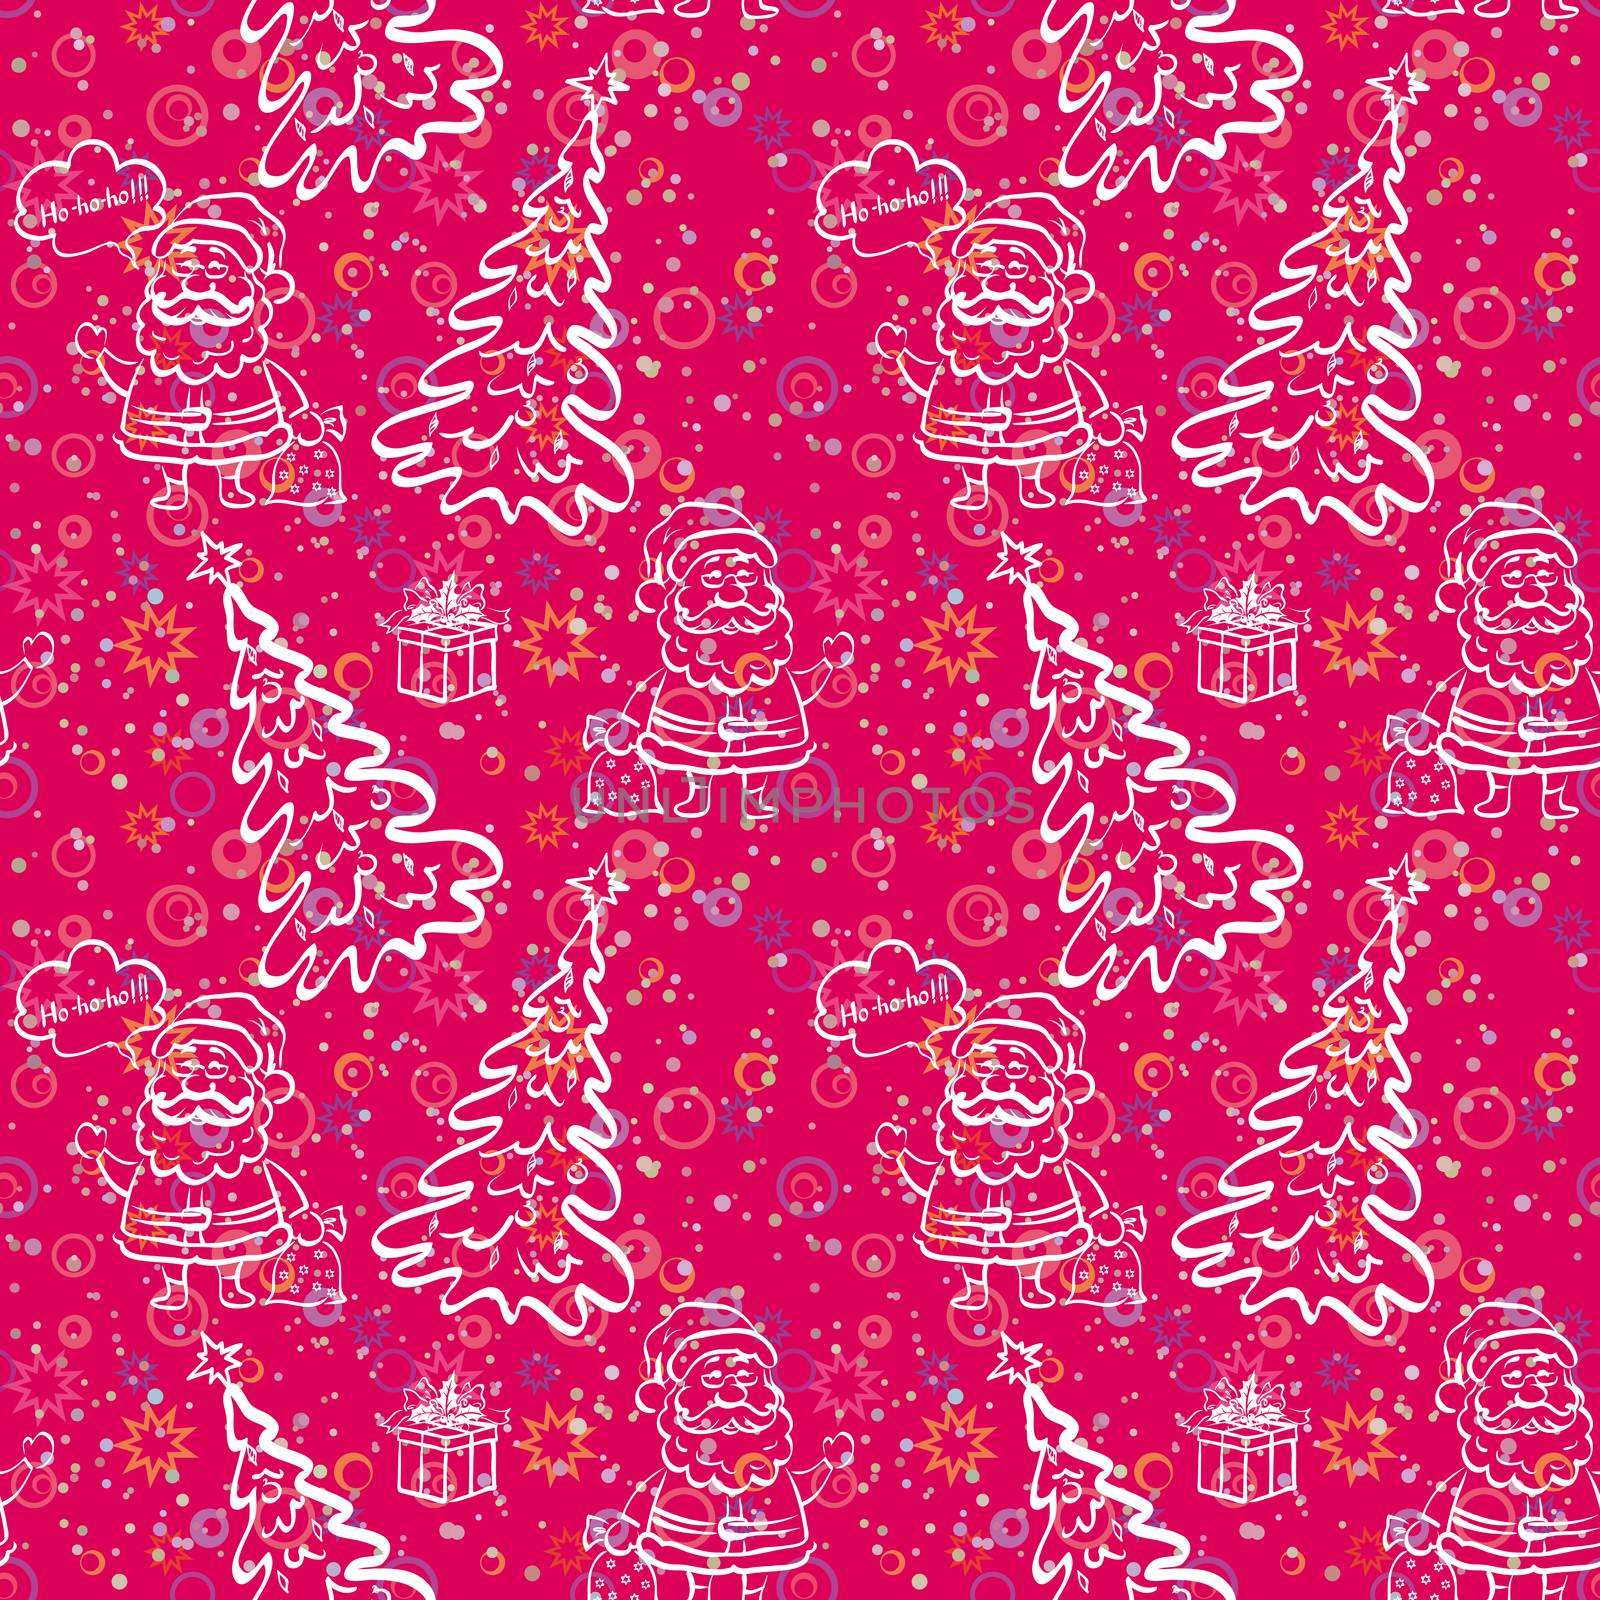 Christmas seamless pattern for holiday design, cartoon Santa Claus and fir tree, white contours on red background.